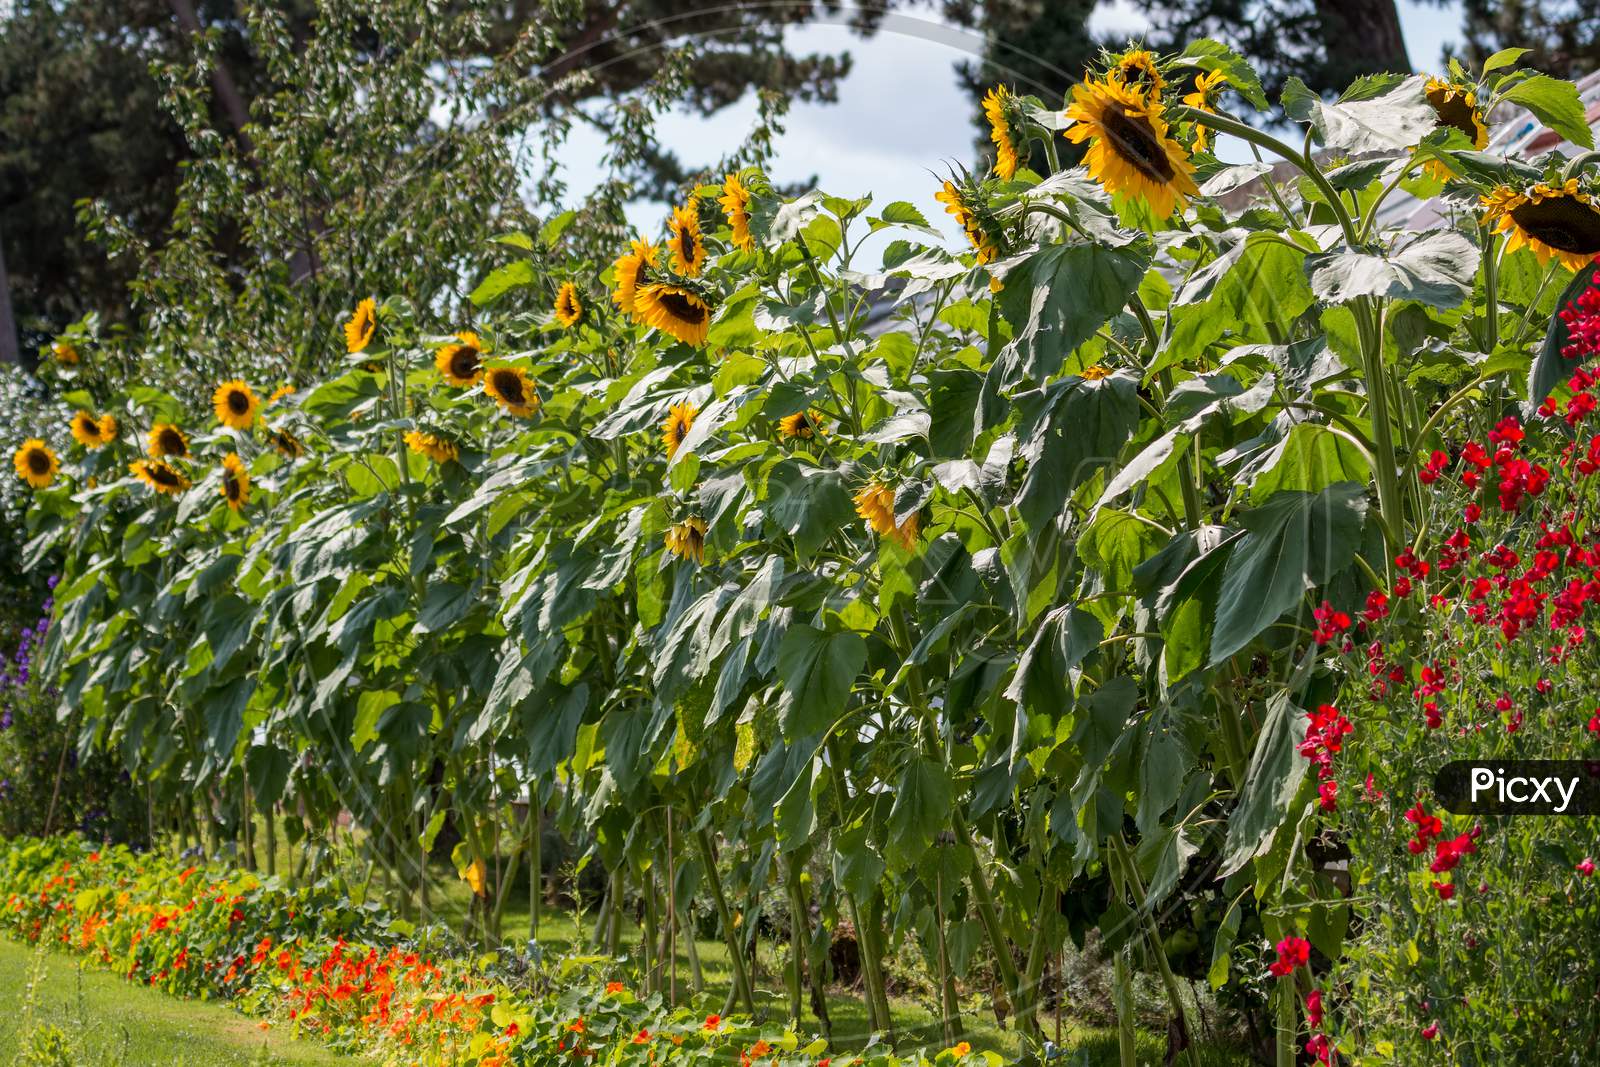 A Row Of Sunflowers (Helianthus Annuus) Blooming In The Summer Sunshine